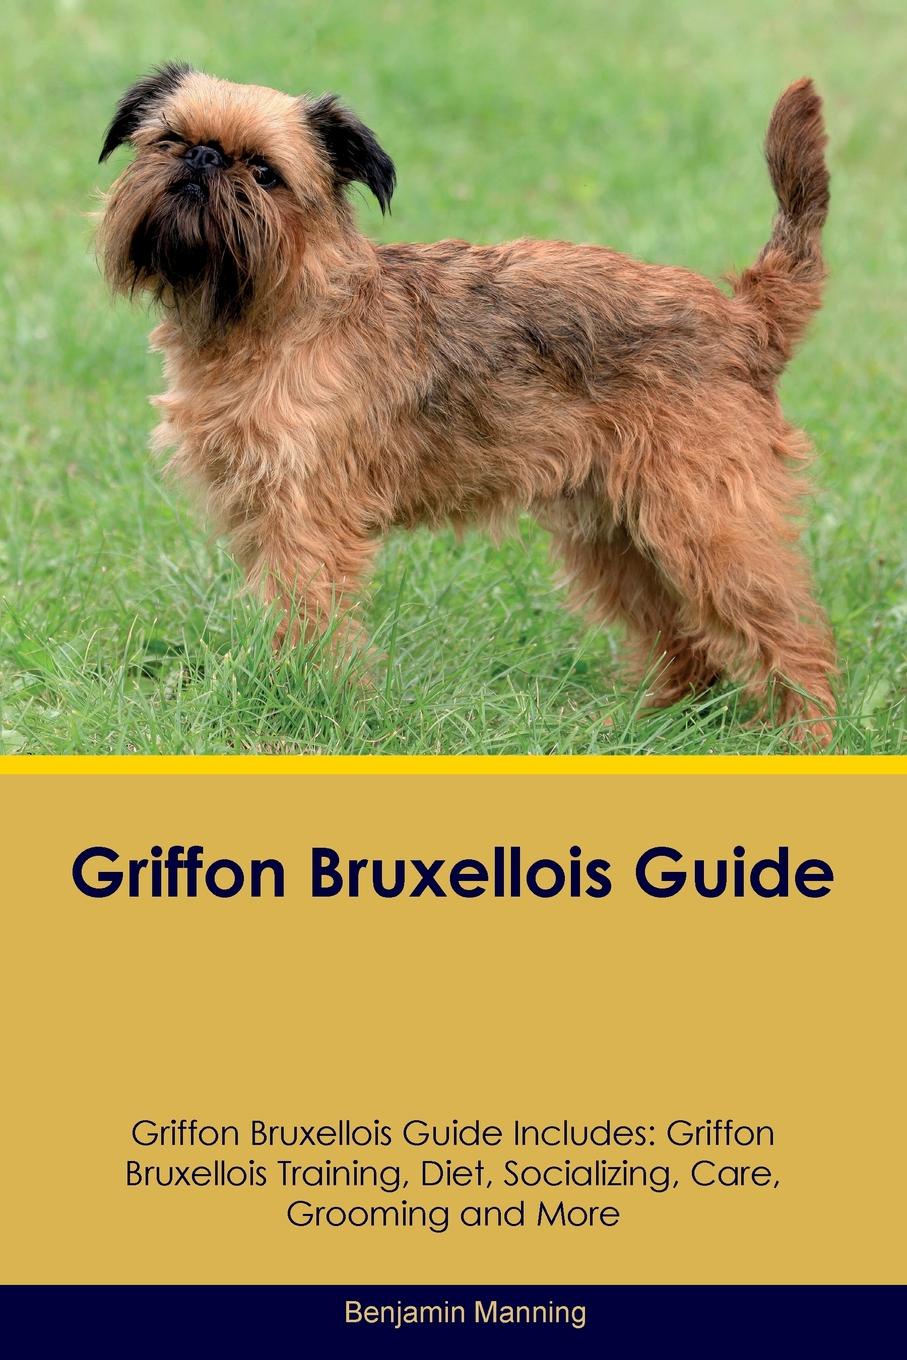 Griffon Bruxellois Guide Griffon Bruxellois Guide Includes. Griffon Bruxellois Training, Diet, Socializing, Care, Grooming, Breeding and More